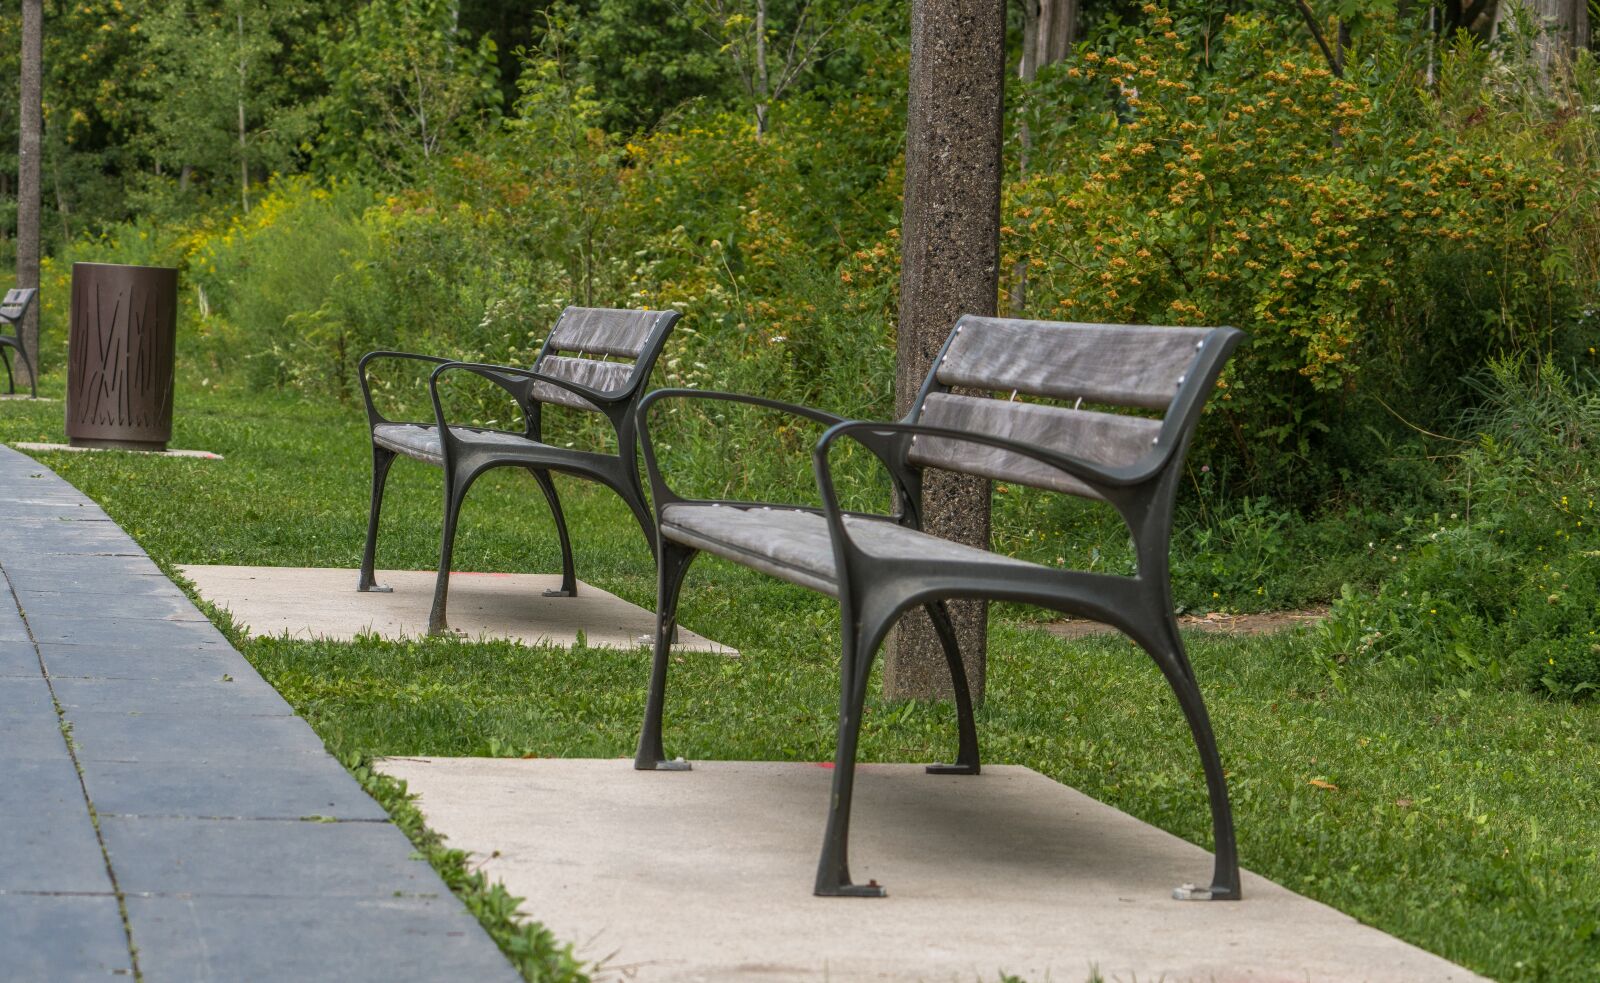 Sony a6500 sample photo. Bench, nature, park photography